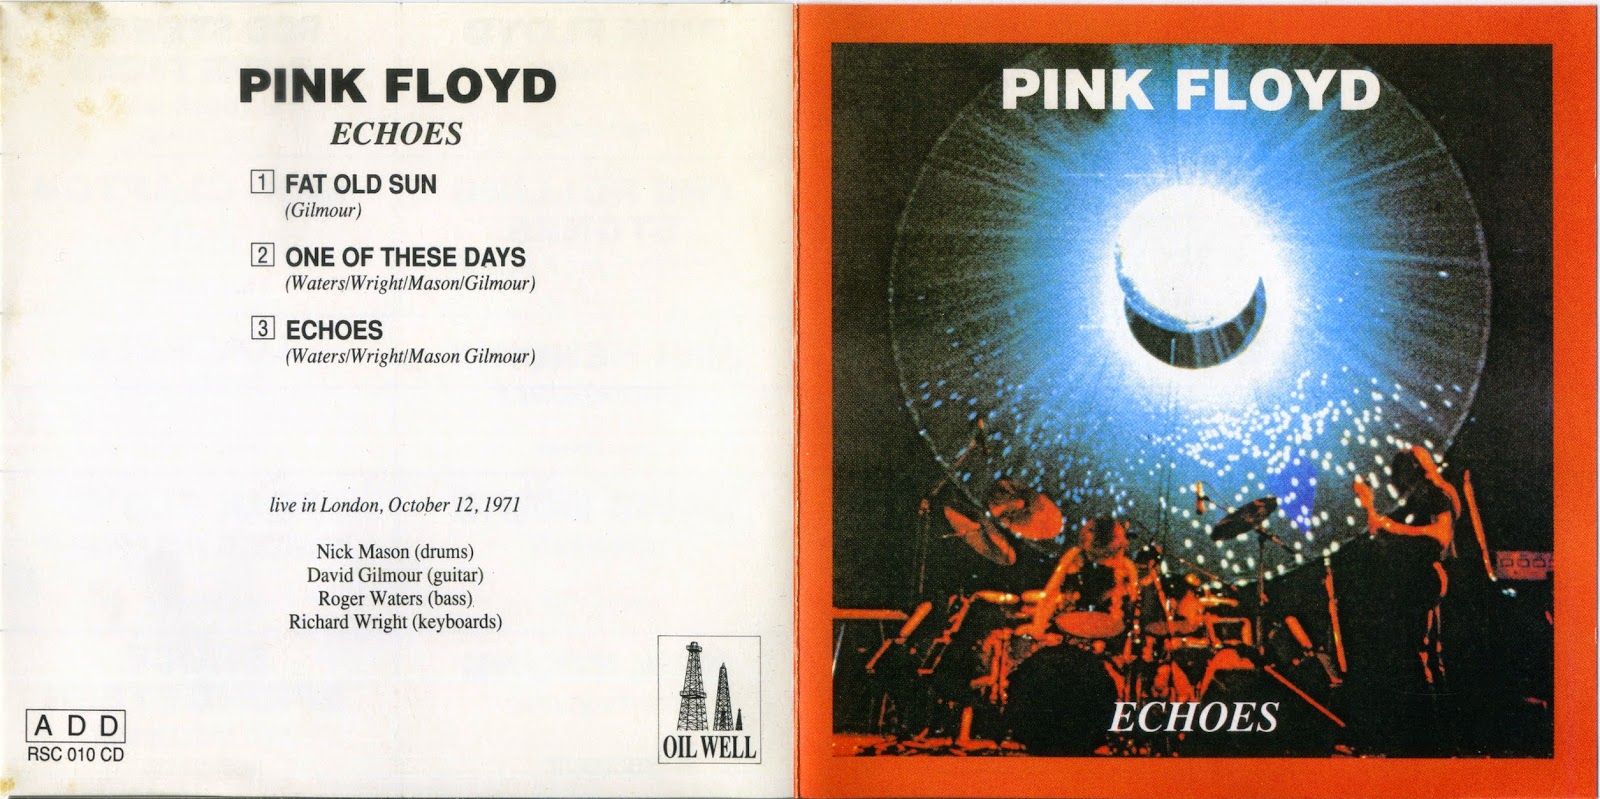 One of these days 3. Pink Floyd Echoes 1971. Pink Floyd Echoes CD 1. Пинк Флойд Echoes. Pink Floyd Echoes обложка.